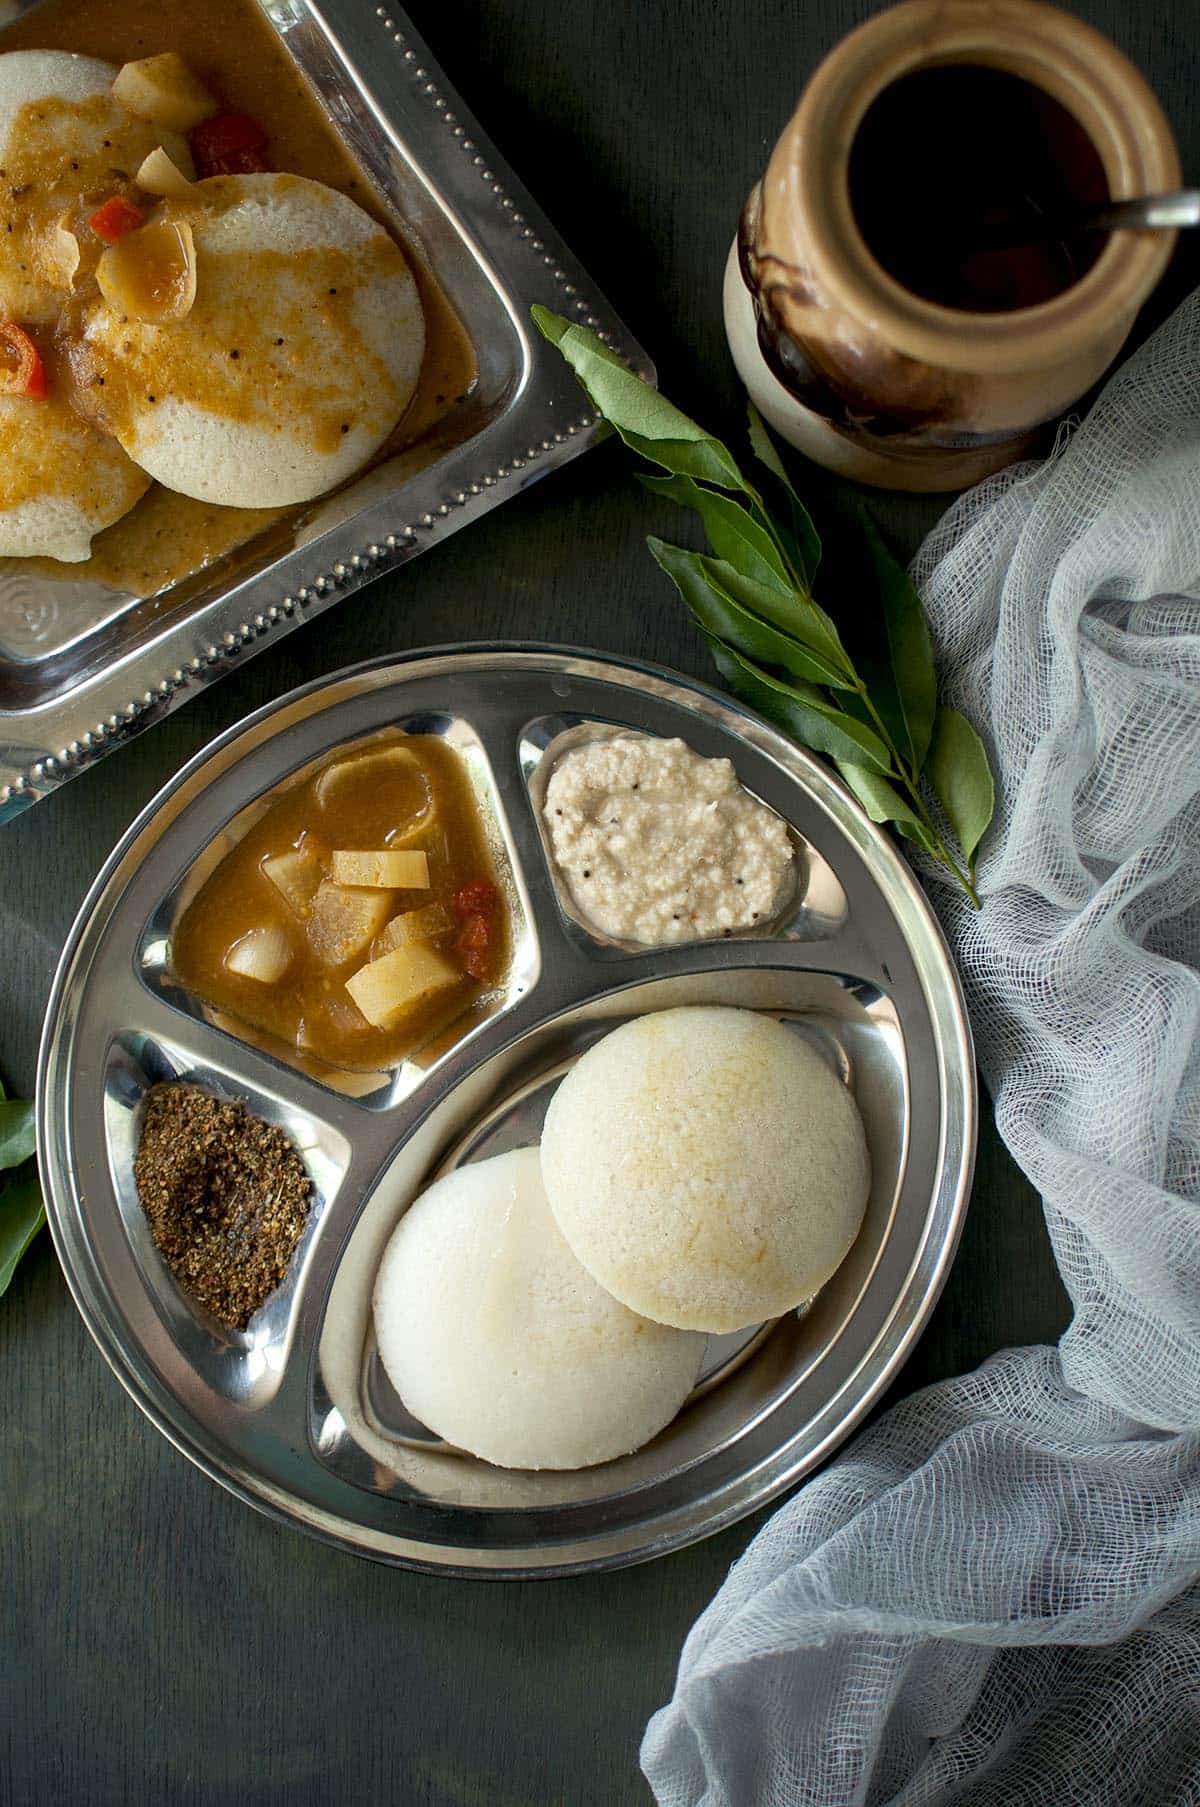 Soth Indian breakfast platter with steamed rice cakes, chutney and sambar